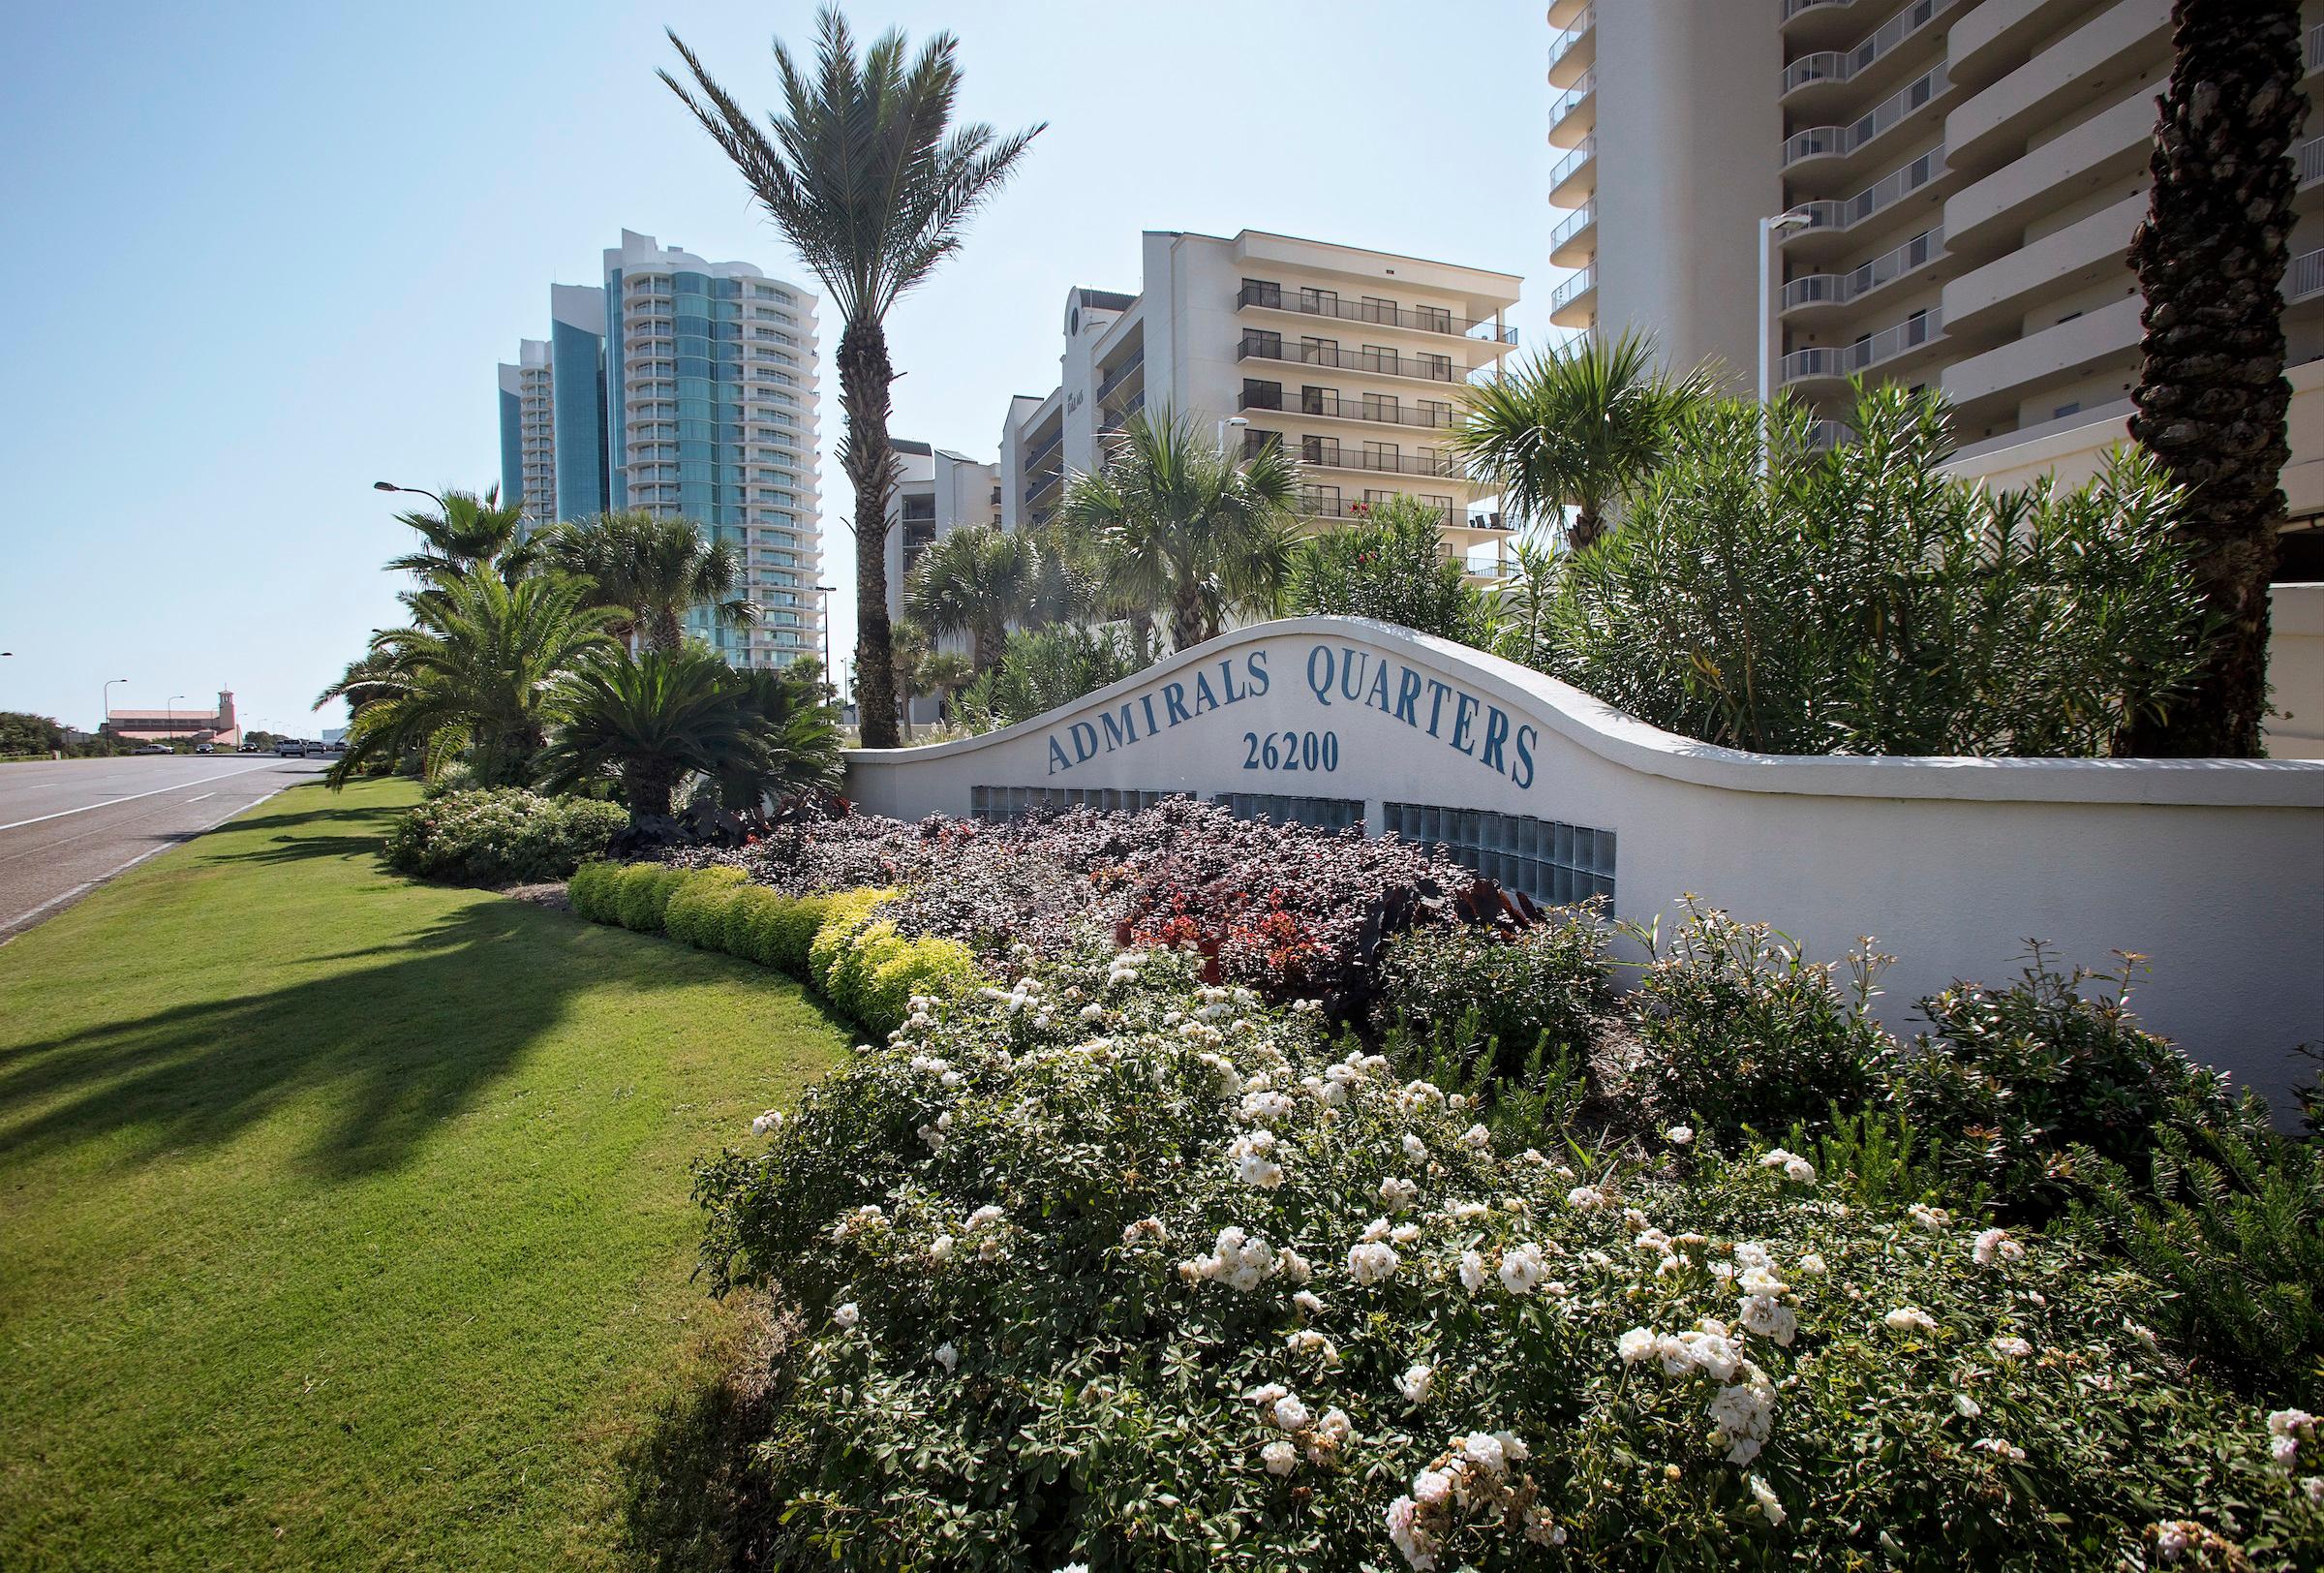 JubileeScape Commercial Landscape Maintenance at the Admirals Quarters in Gulf Shores - one of several condominium properties we provide with year-round grounds maintenance and seasonal color.